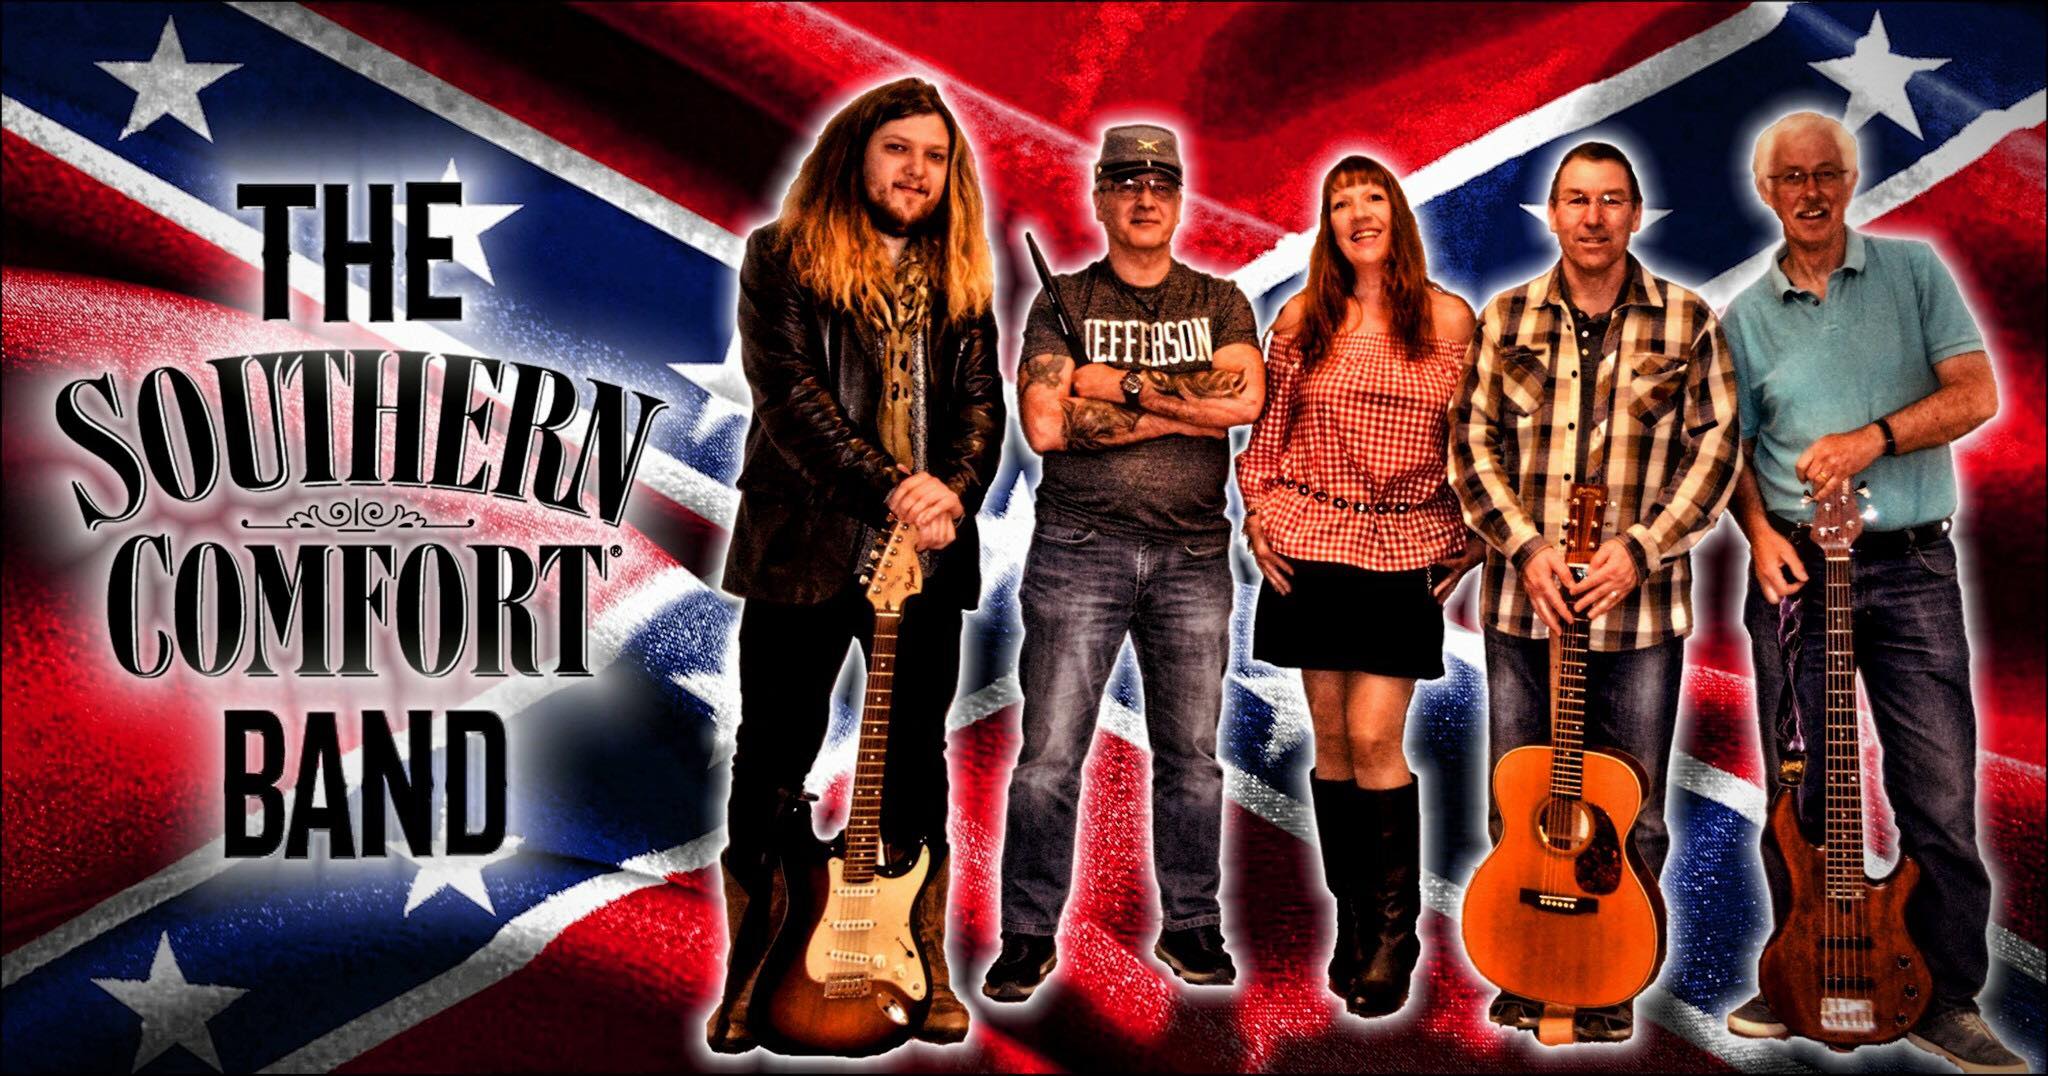 The Southern Comfort Band